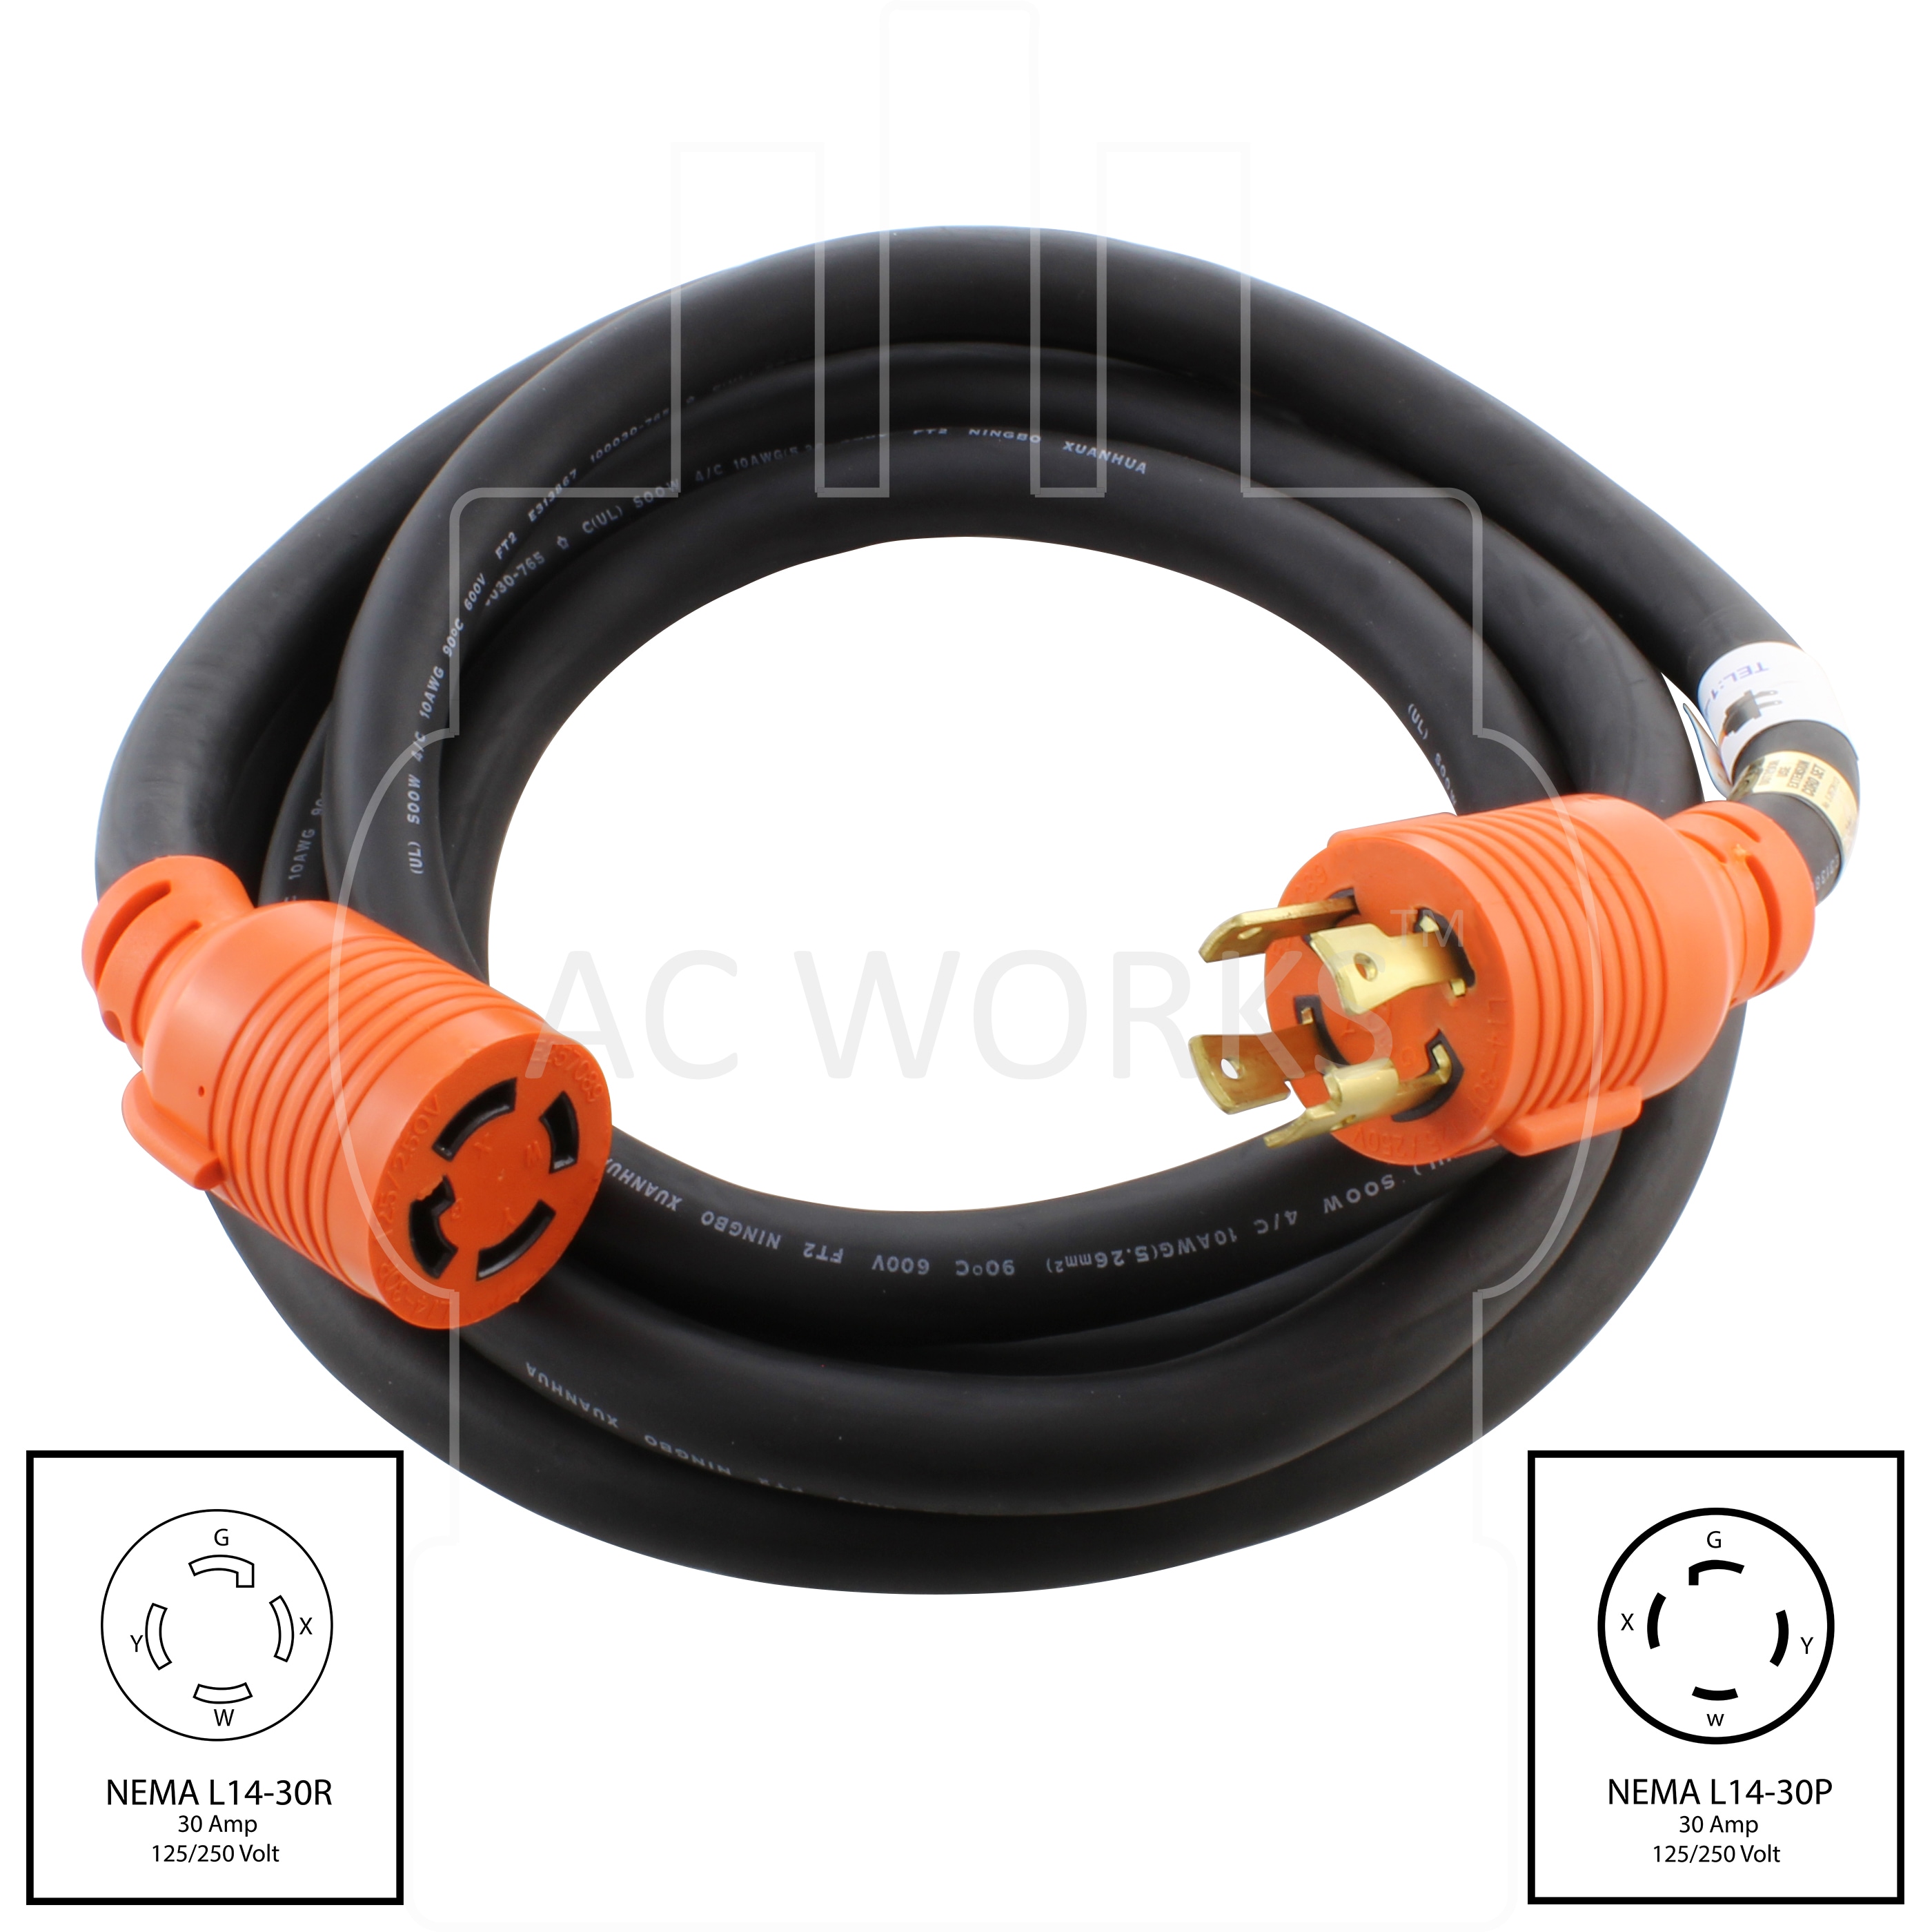 10/3 SOOW Bulk Wire Cord, 3-Wire, 30A, 600V, Outdoor Rated